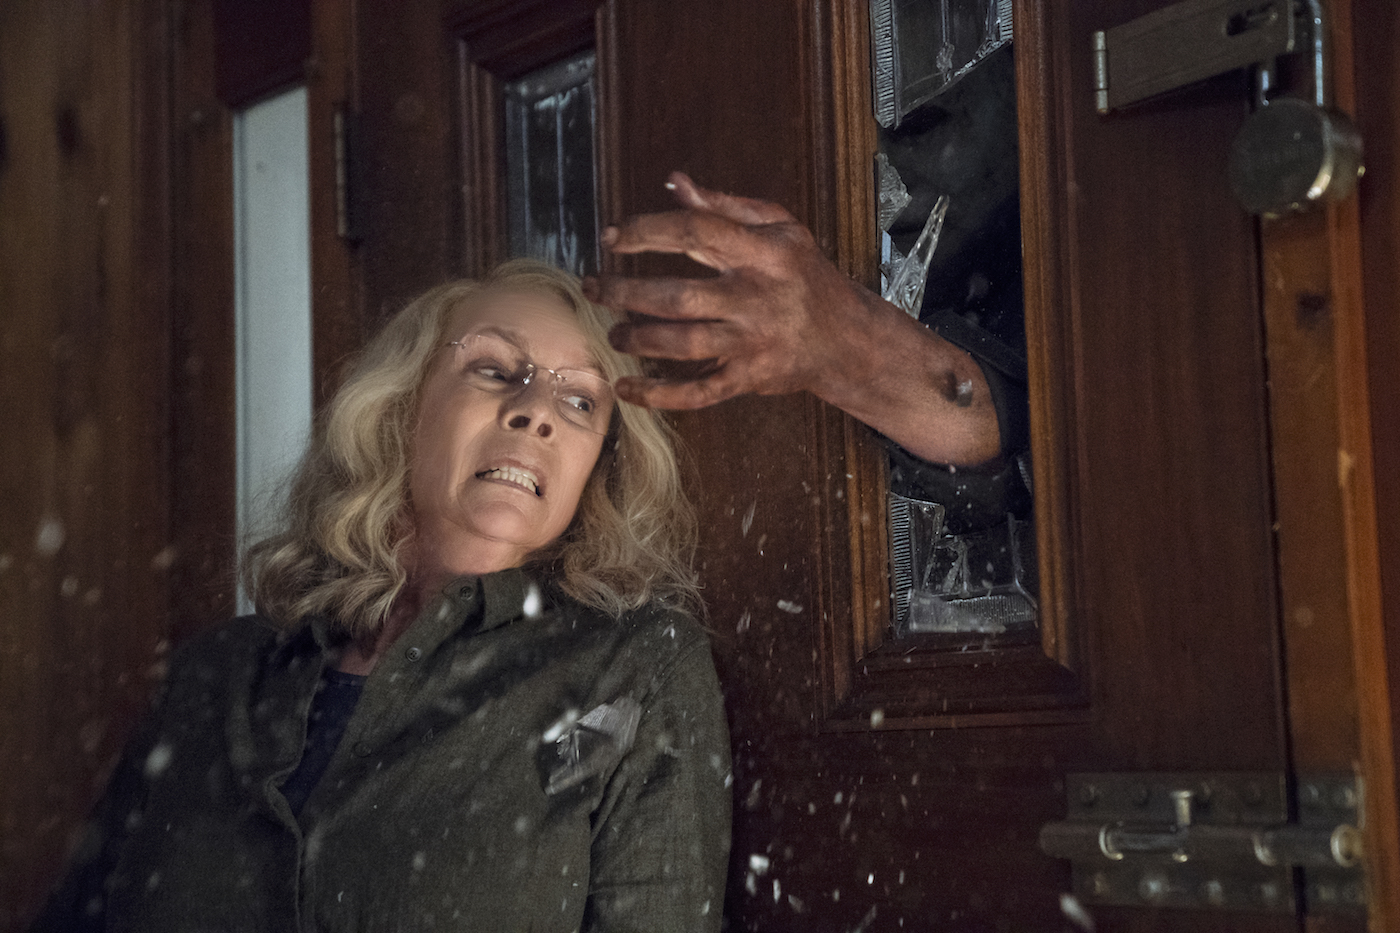 In "Halloween," JAMIE LEE CURTIS returns to her iconic role as Laurie Strode, who comes to her final confrontation with Michael Myers, the masked figure who has haunted her since she narrowly escaped his killing spree on Halloween night four decades ago. Photo Credit: Ryan Green